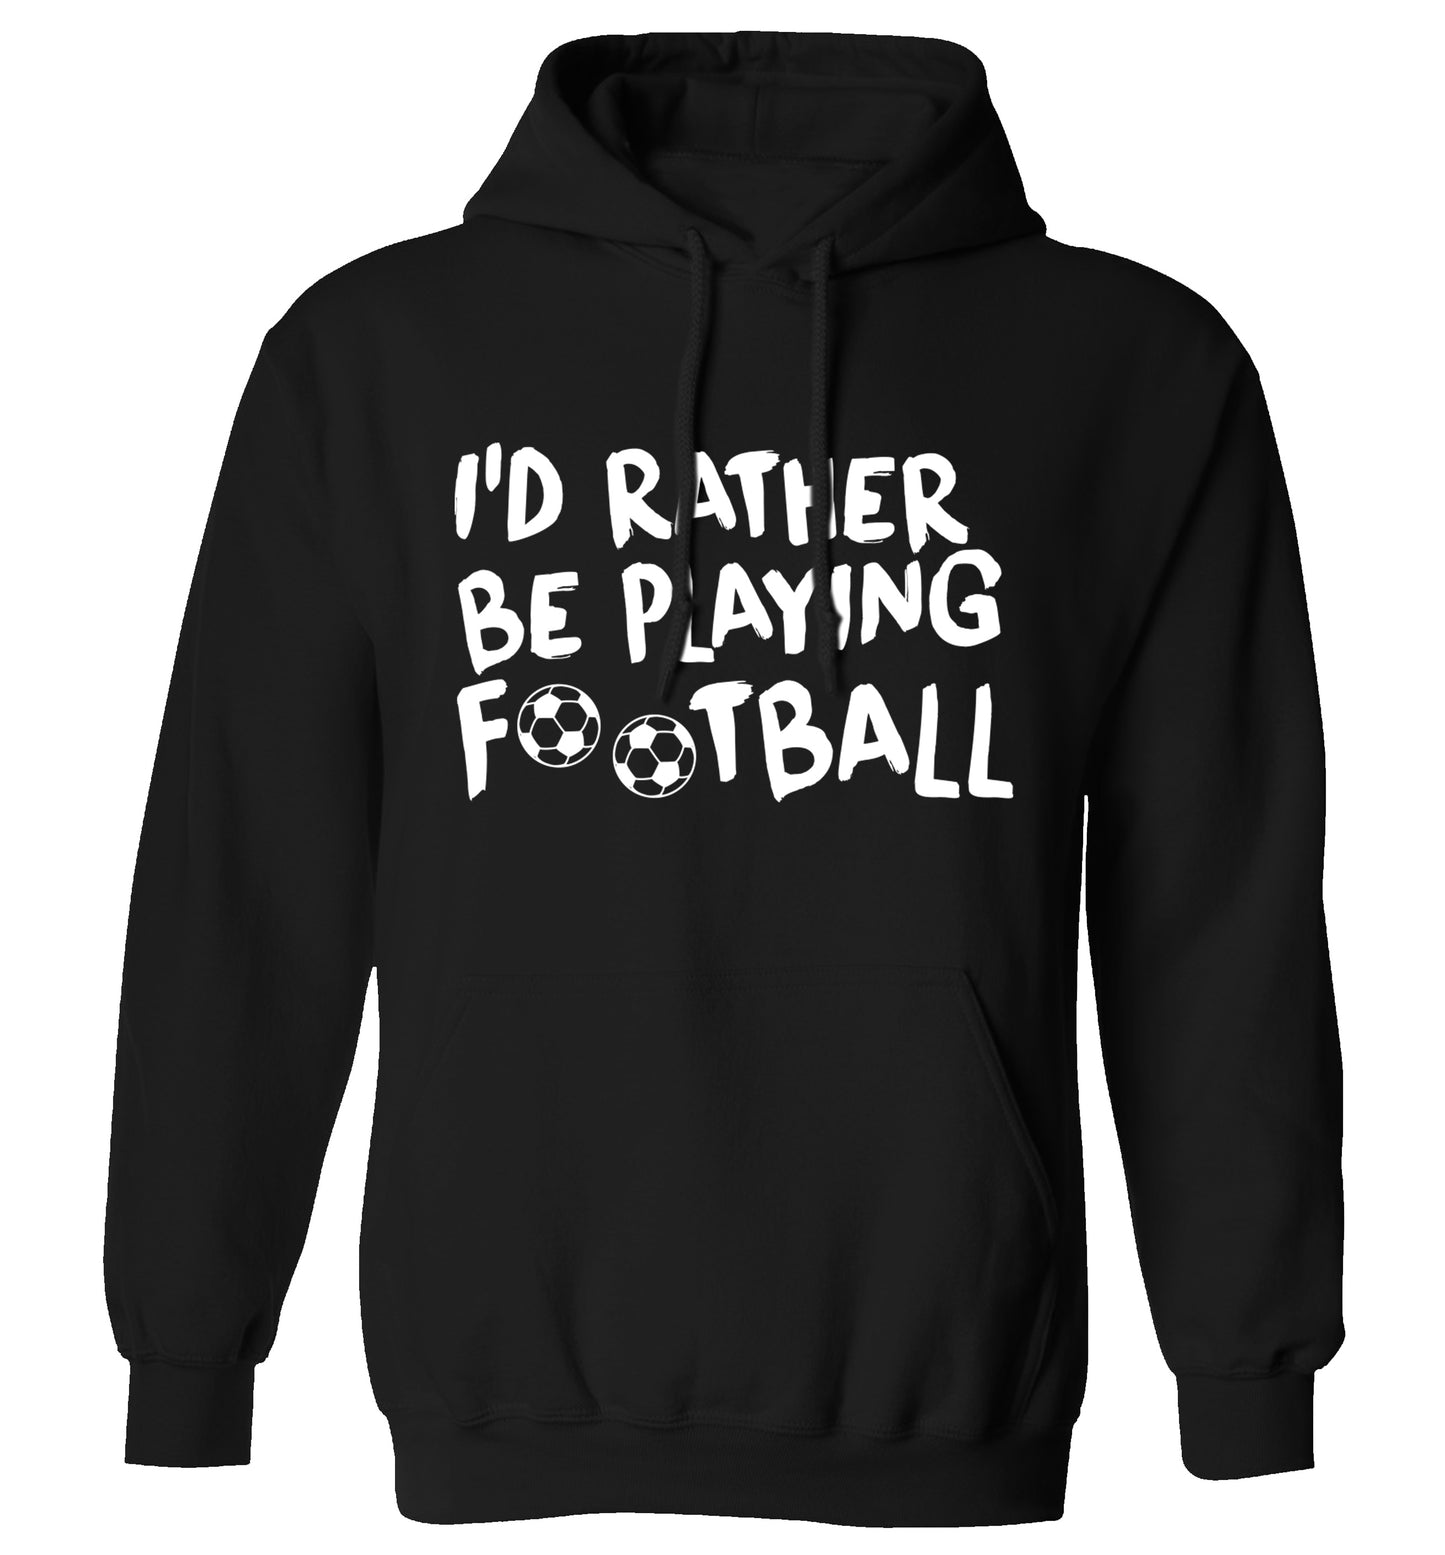 I'd rather be playing football adults unisexblack hoodie 2XL